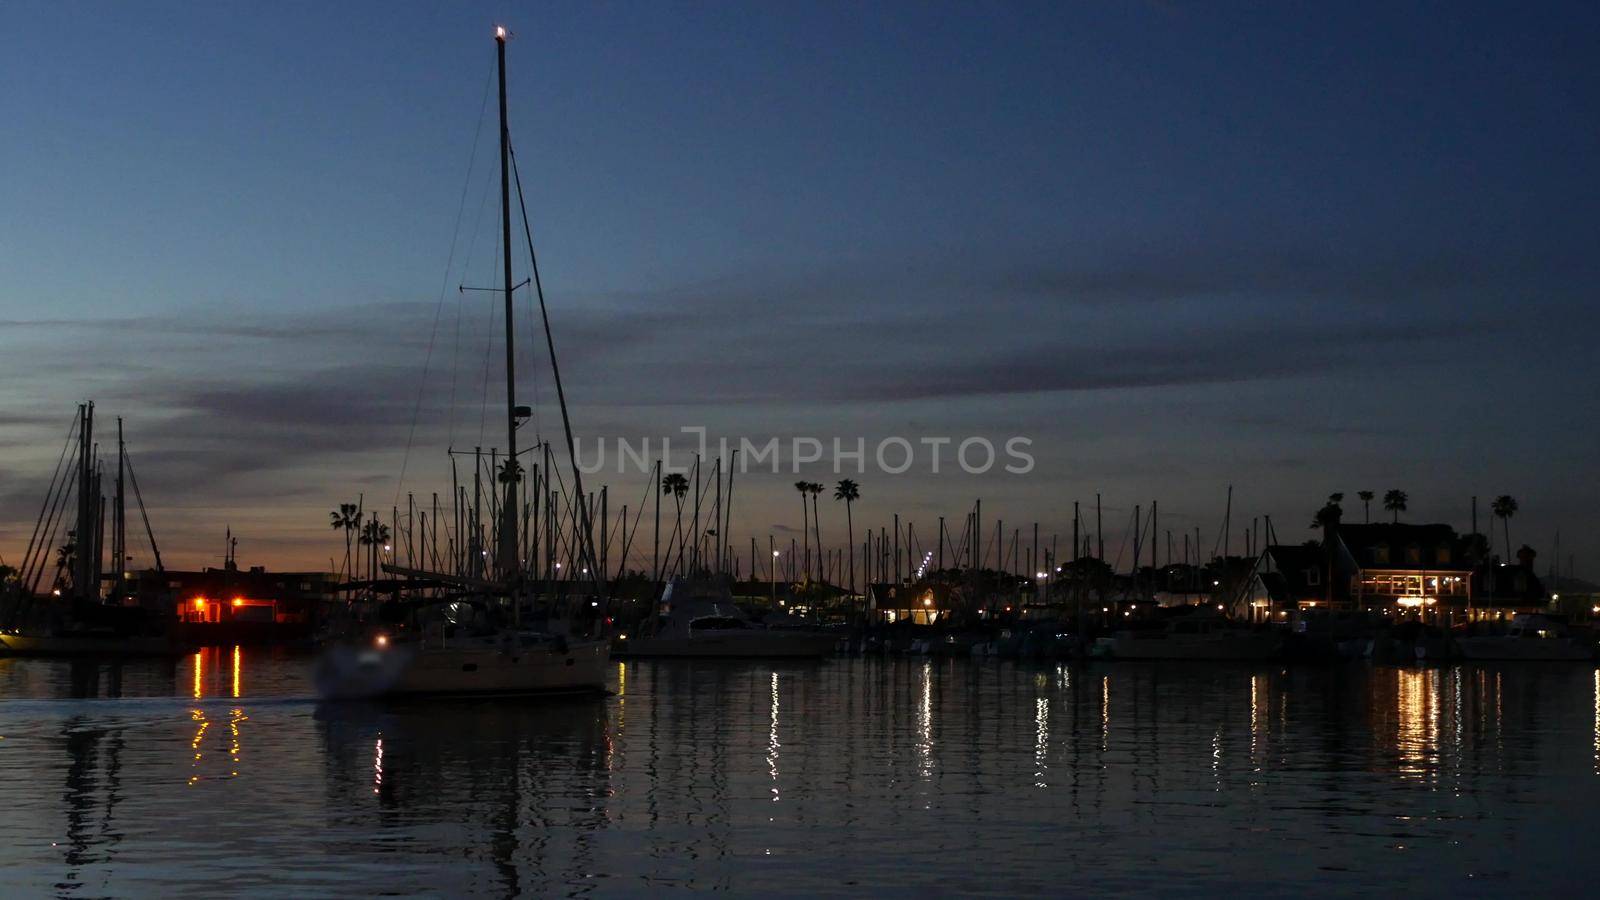 Luxury yachts sailboats floating, marina harbour quay. Sail boat masts, nautical vessels in port. Harbor fisherman village in Oceanside, California USA. Evening dusk, twilight lights and palm trees.